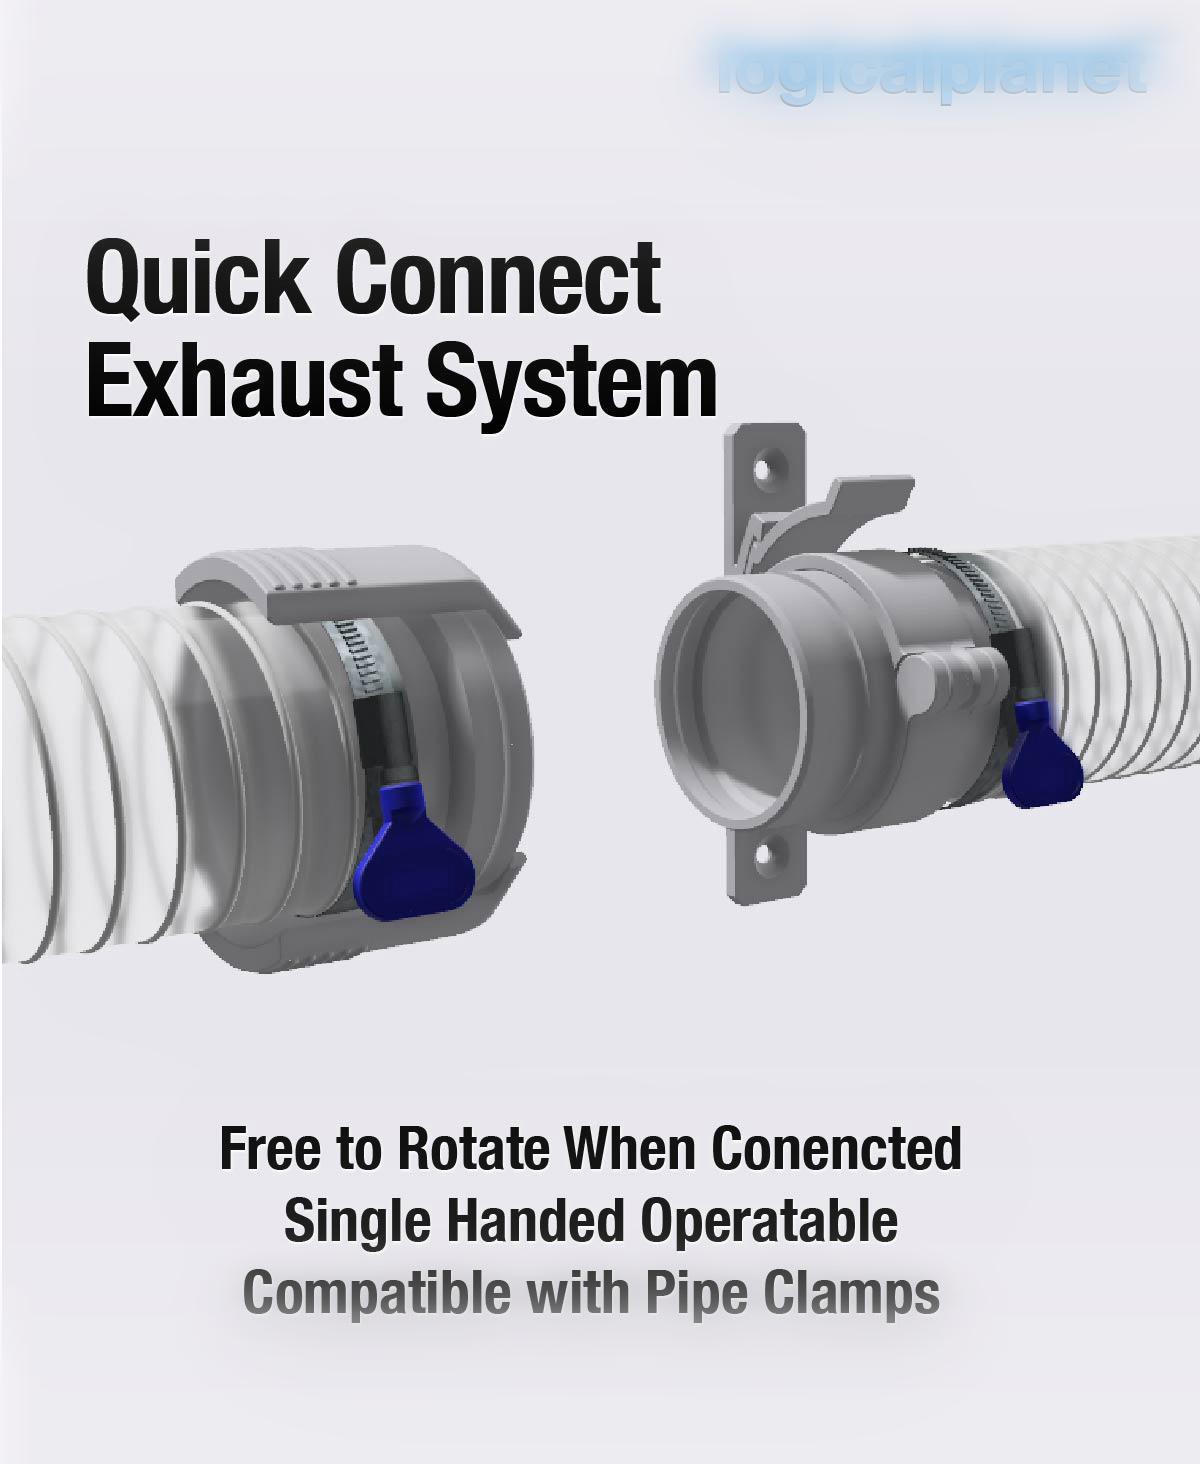 LPE Exhaust Quick Release and Mounting System 3d model